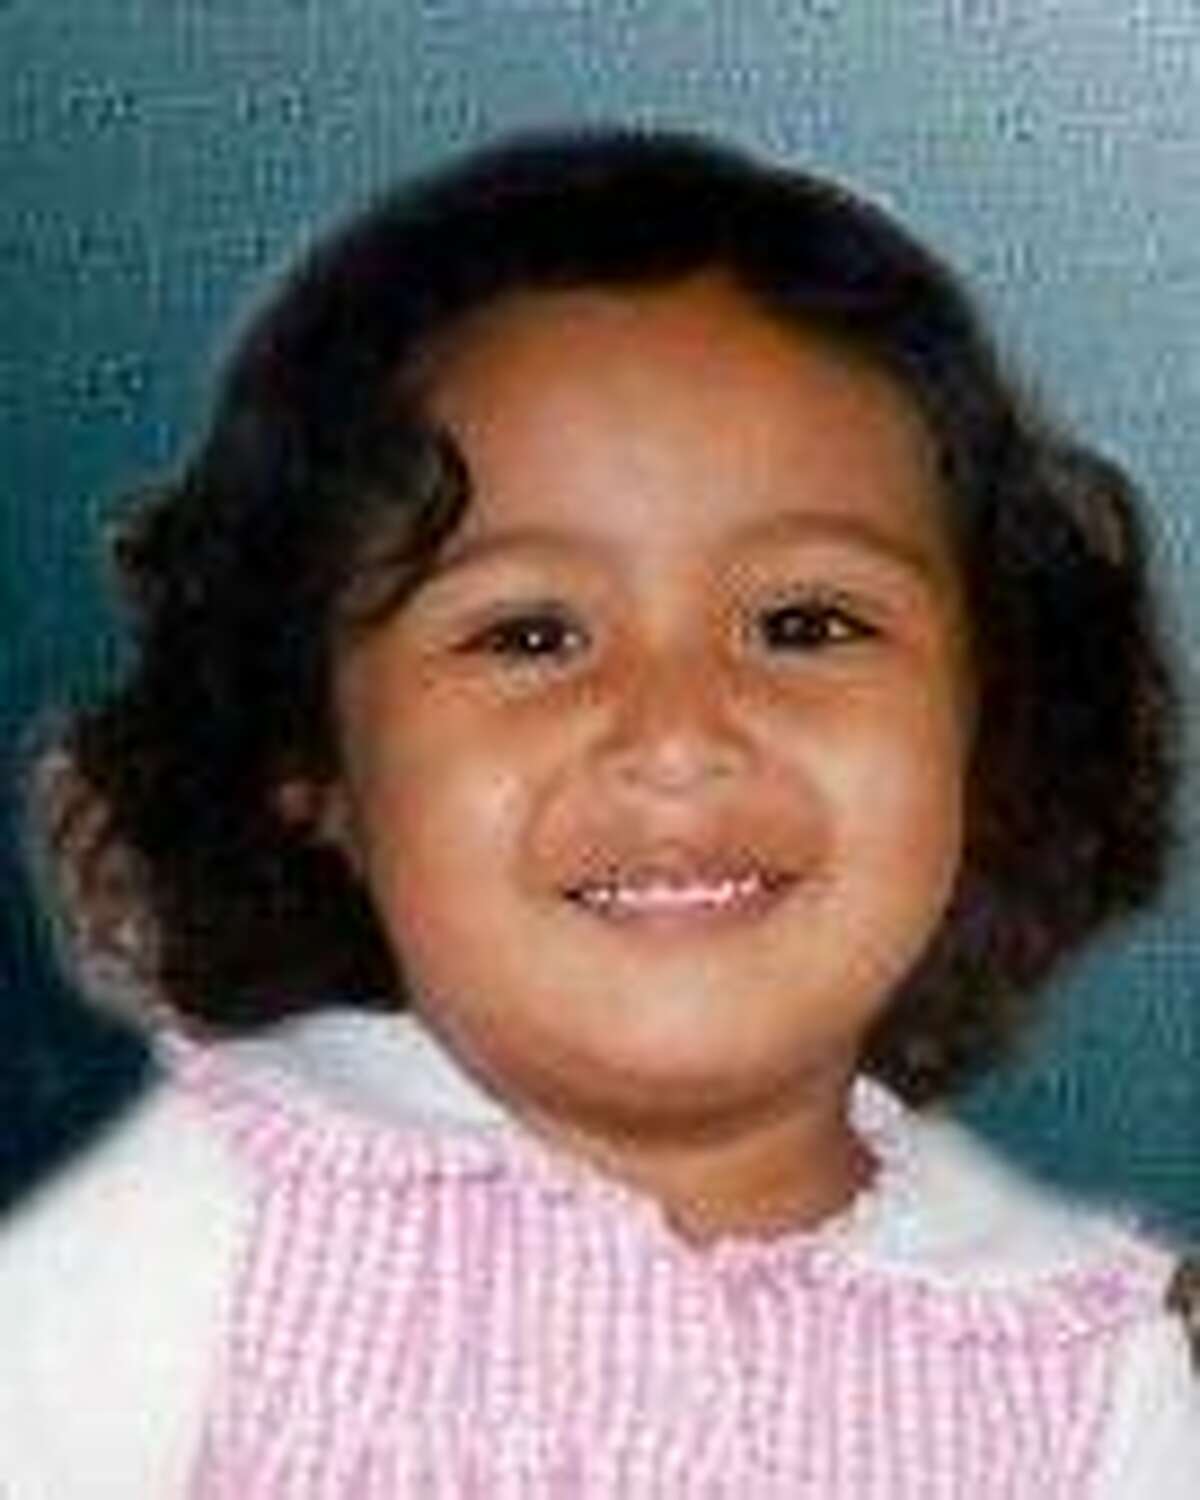 Andrea Reyes was 1 when she went missing in New Haven in 1999.